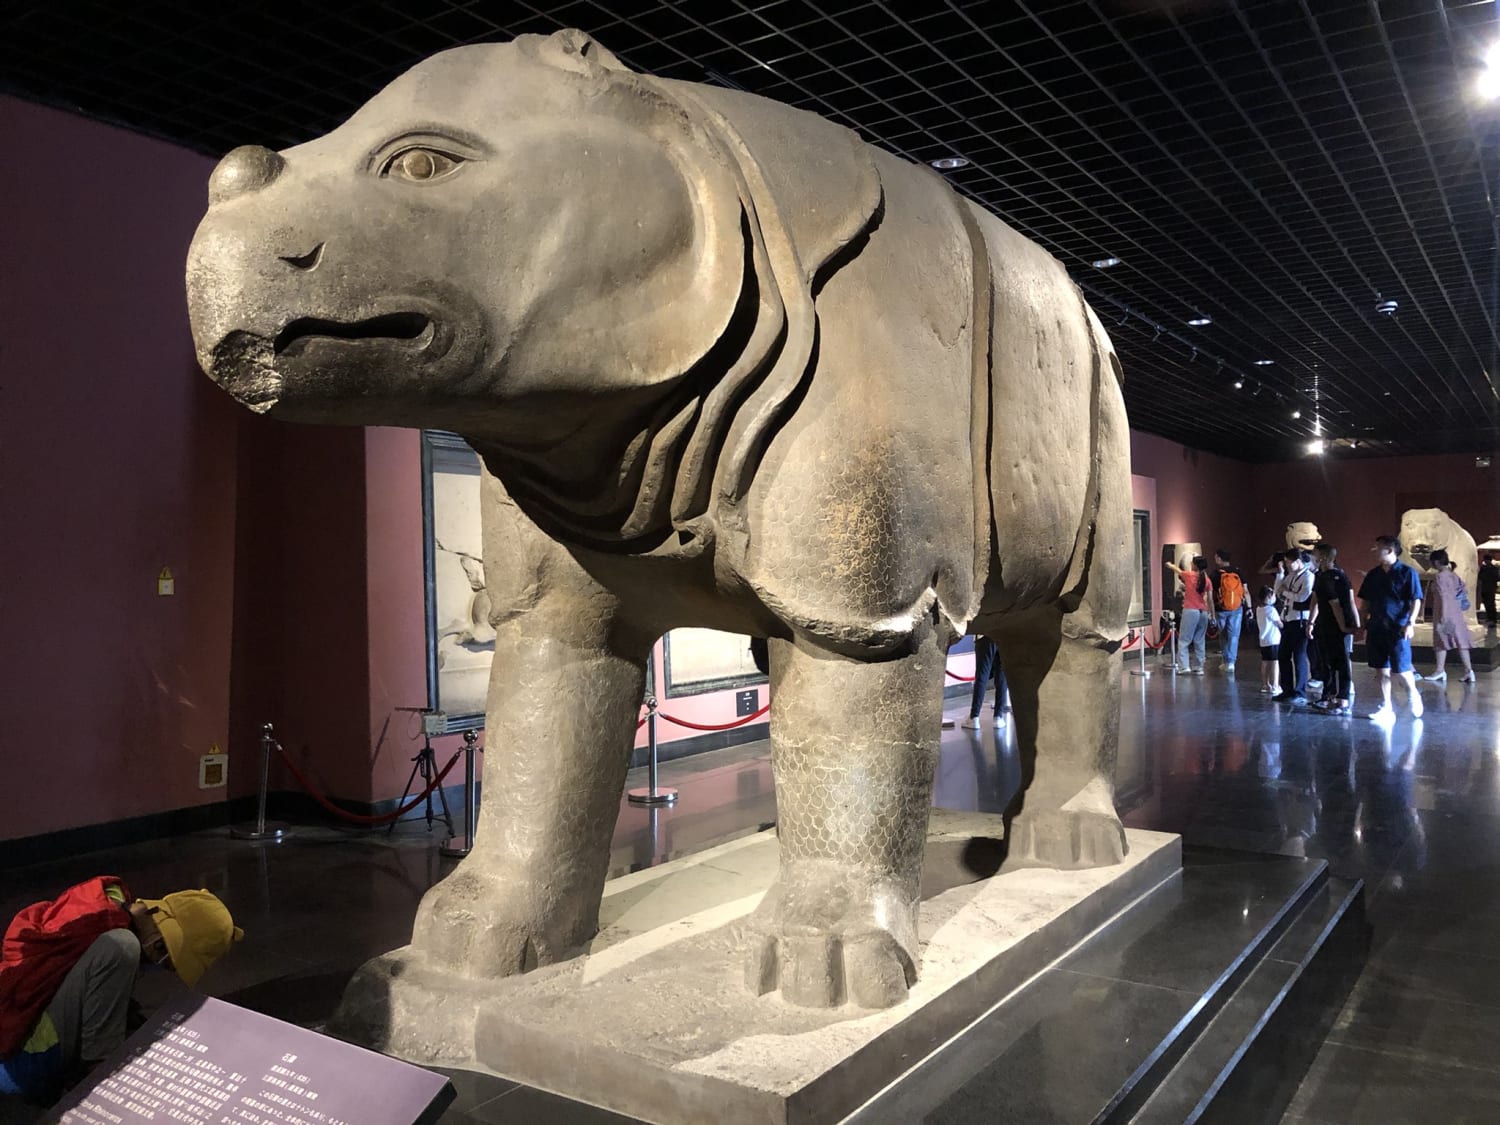 Colossal stone rhino from the tomb of Emperor Gaozu. China, Tang dynasty, around 635 AD